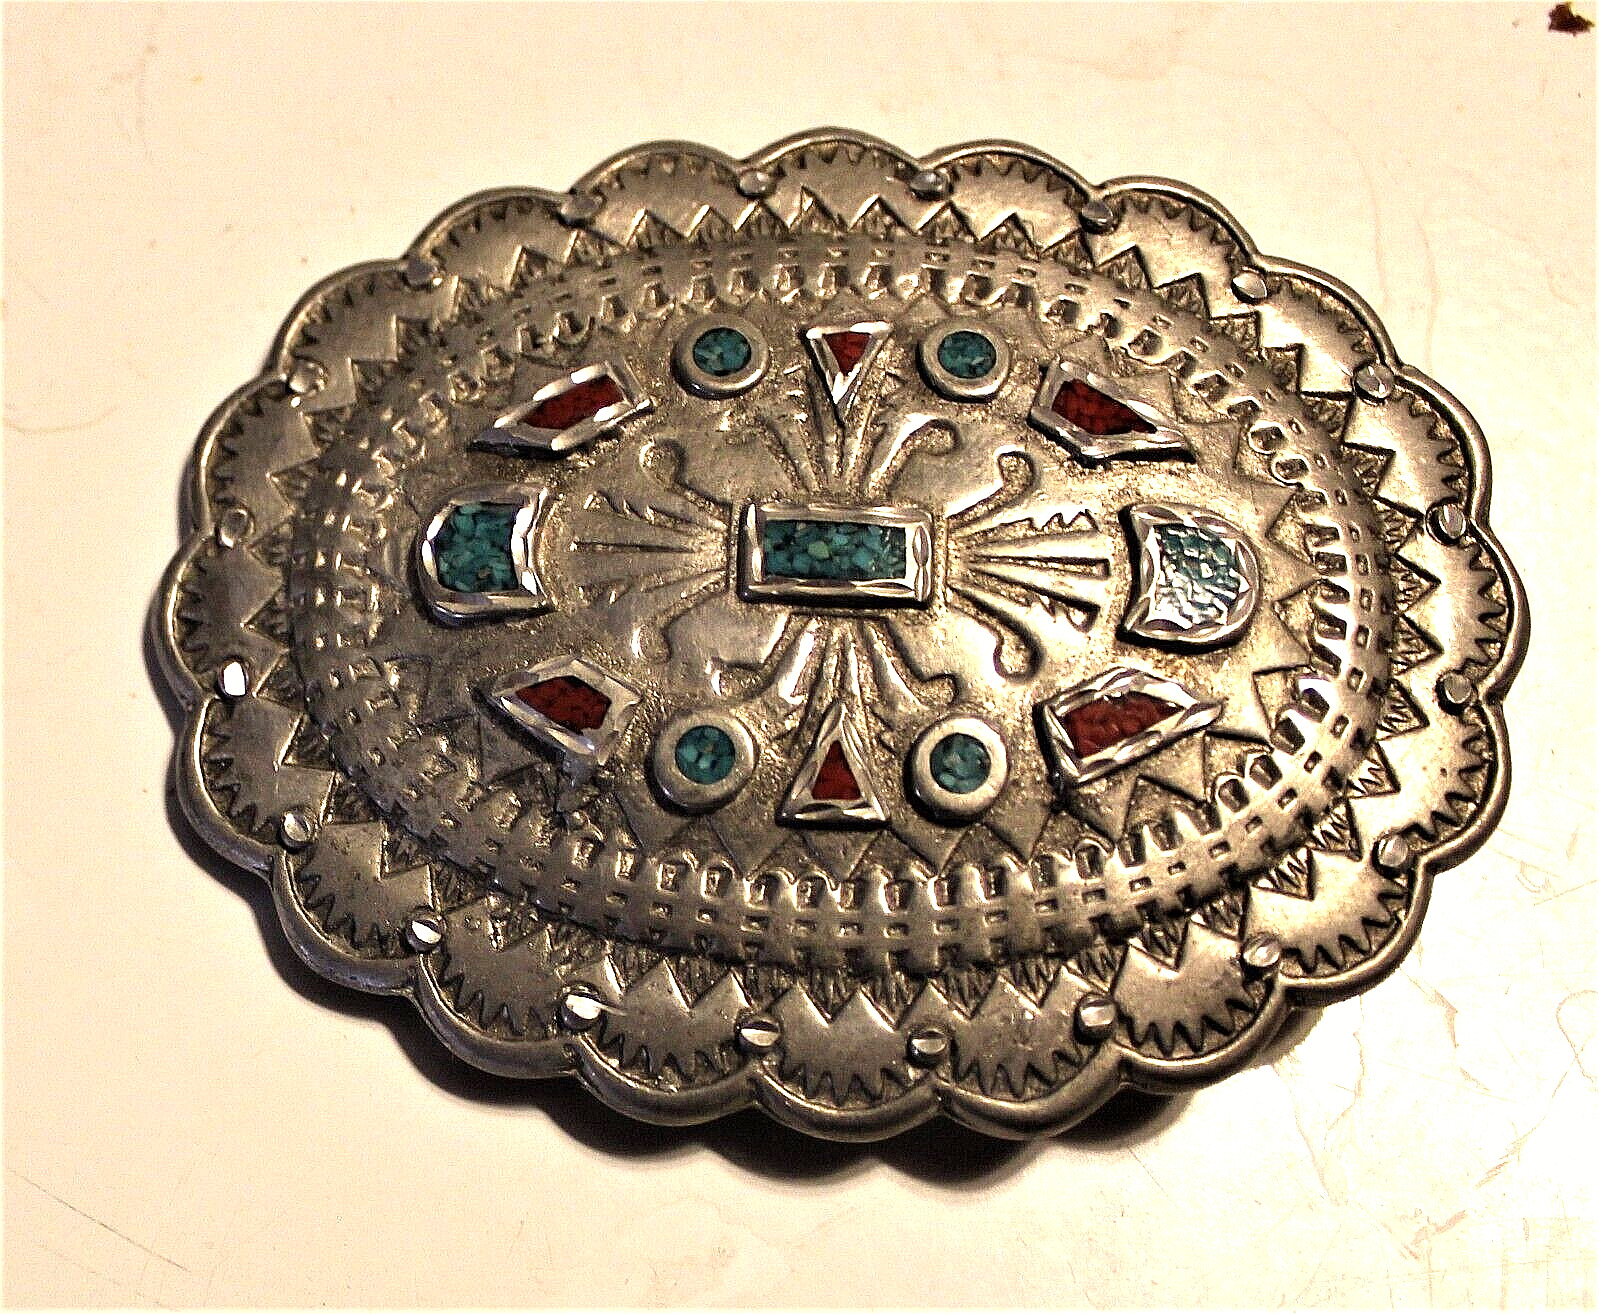 Large Southwestern Gent\'s Belt Buckle, Silver-Toned, Turq. and Coral Accents